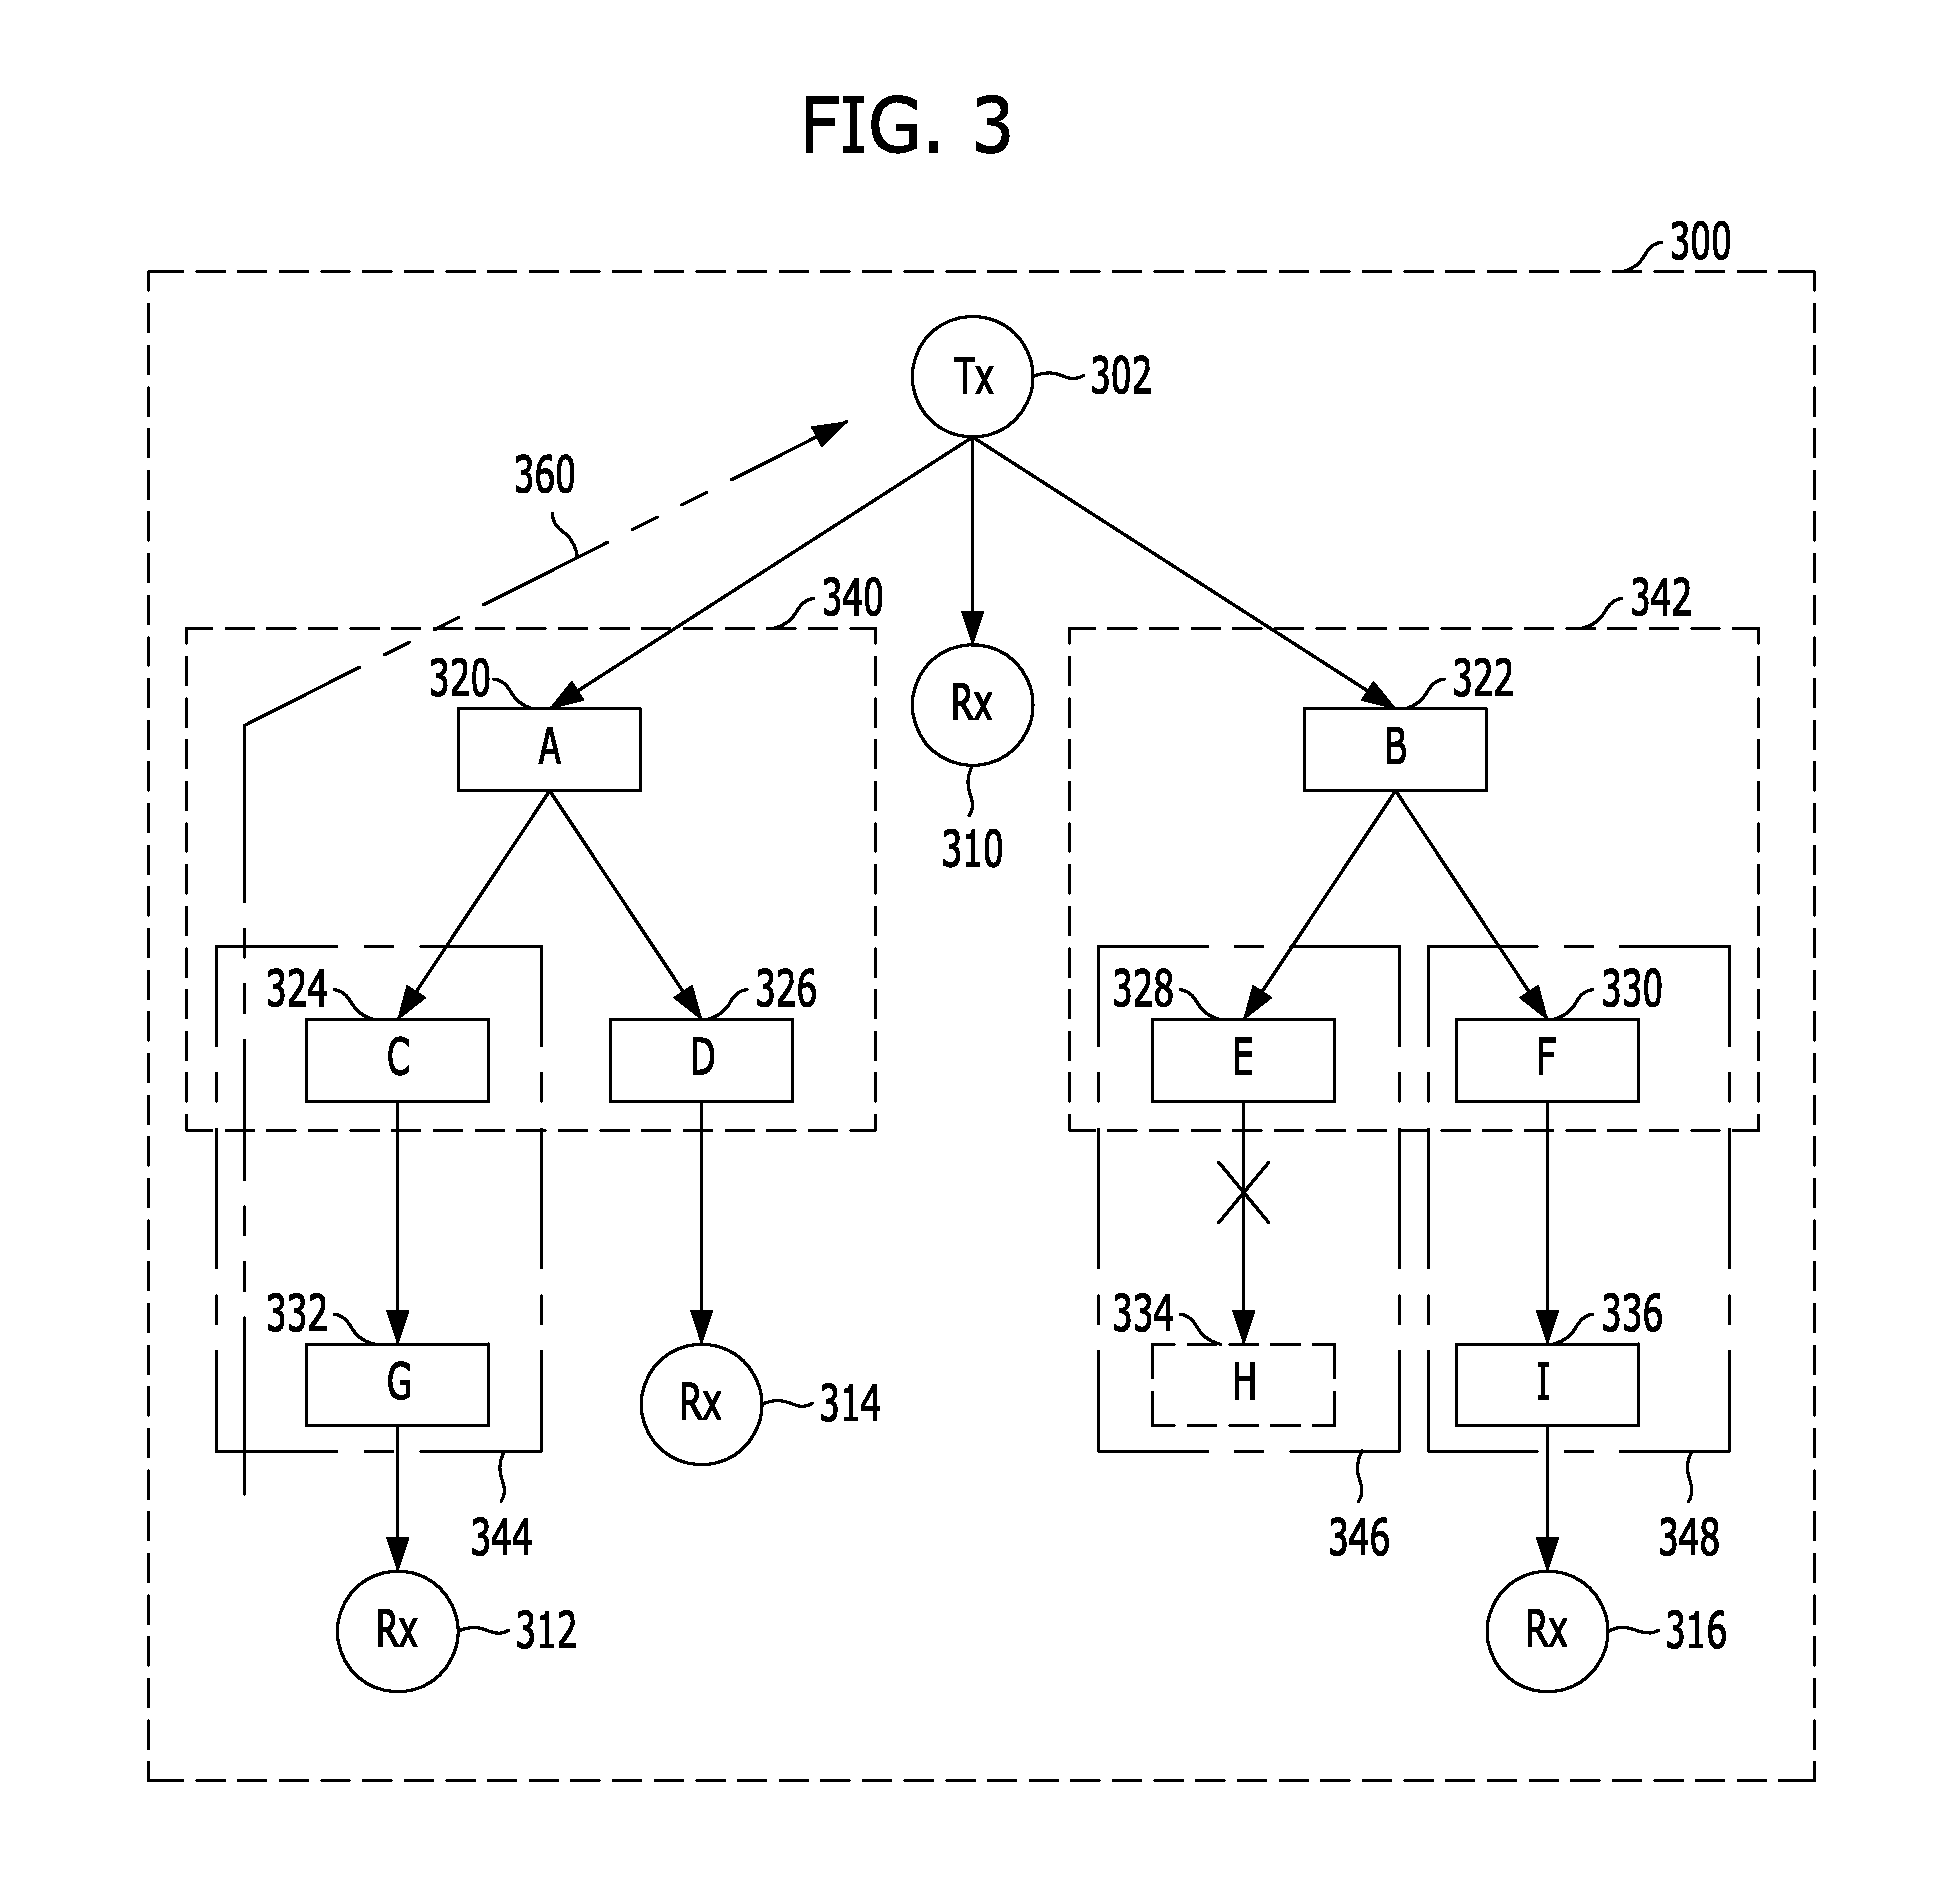 Apparatus and method for analyzing radio wave propagation in radio wave system